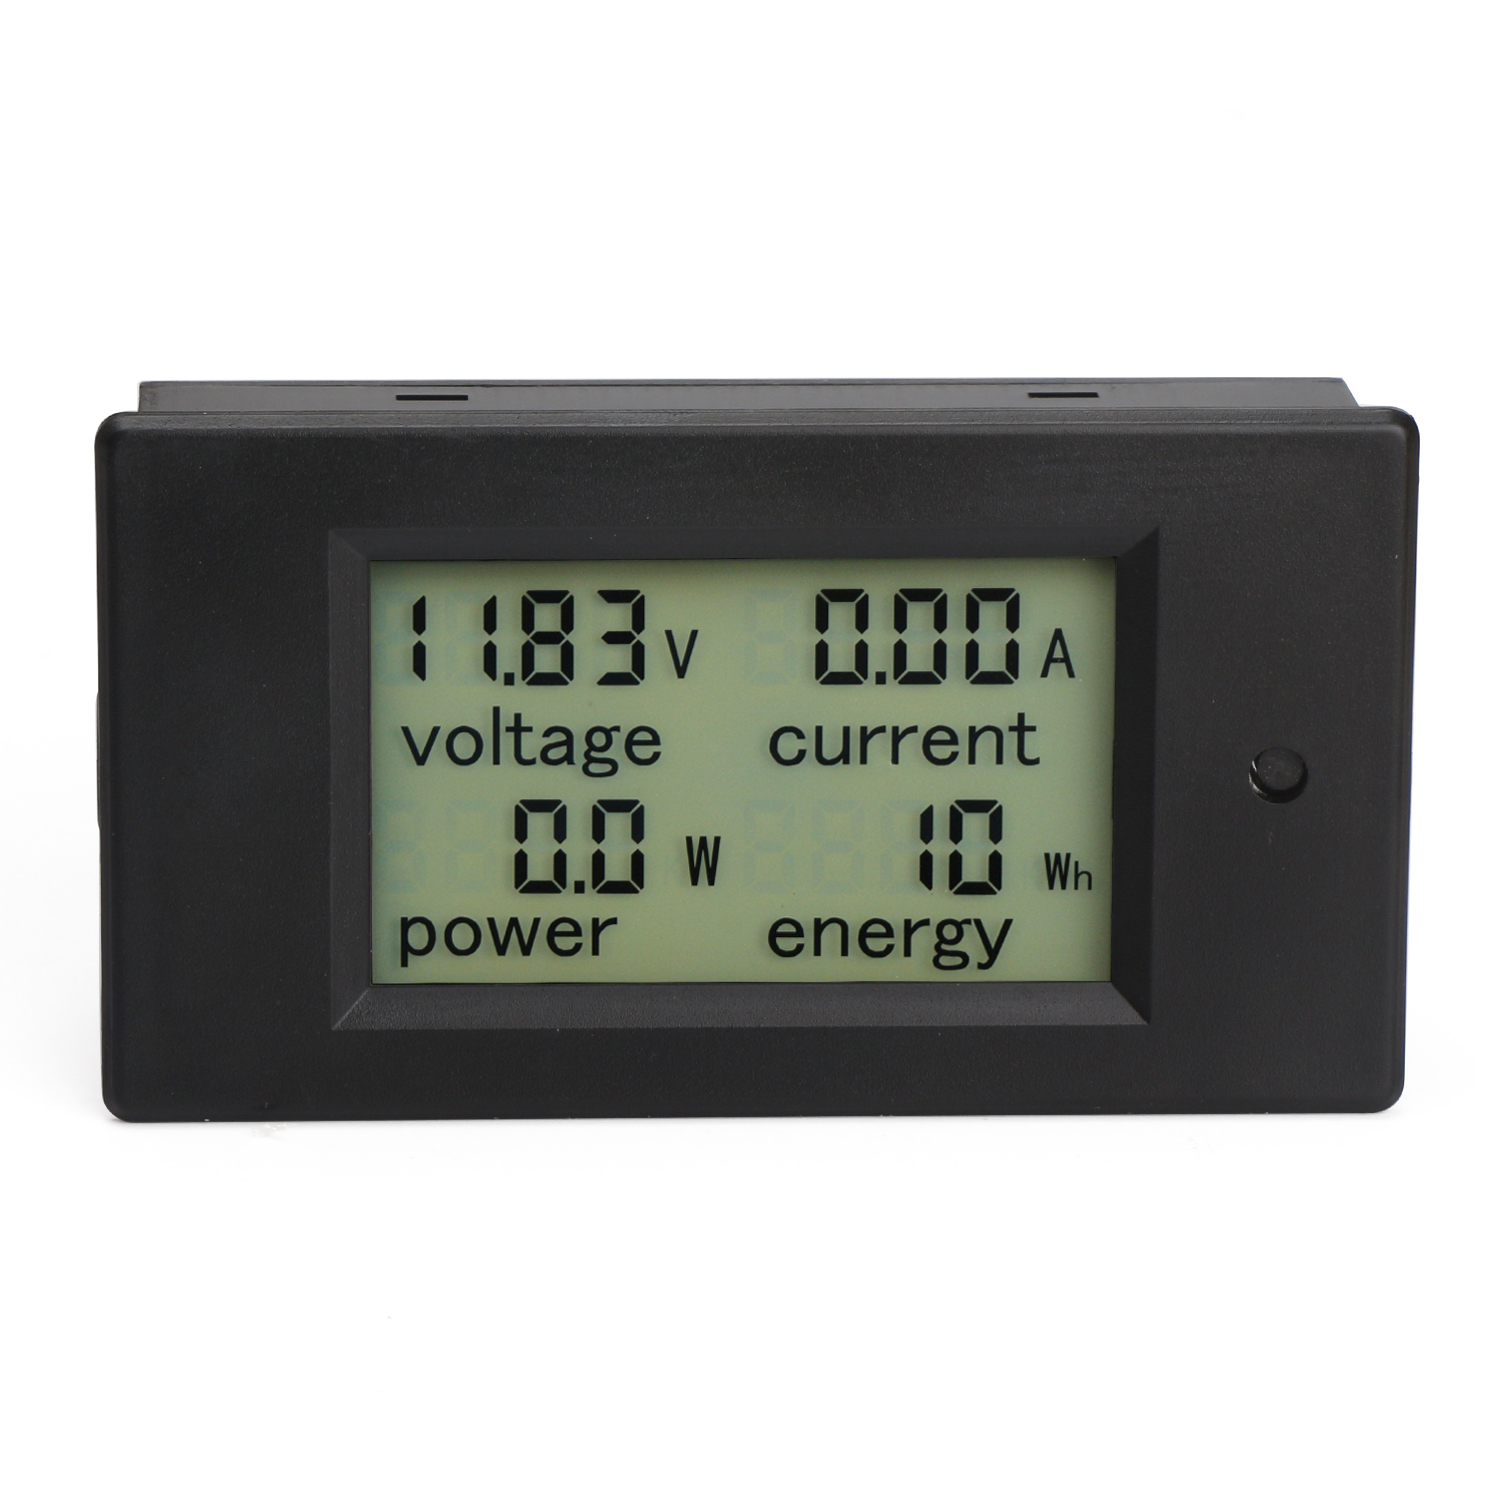 DC 6.5-100v 50A Meter Voltage Current Power Energy Combo Monitor 50A Shunt  UK 